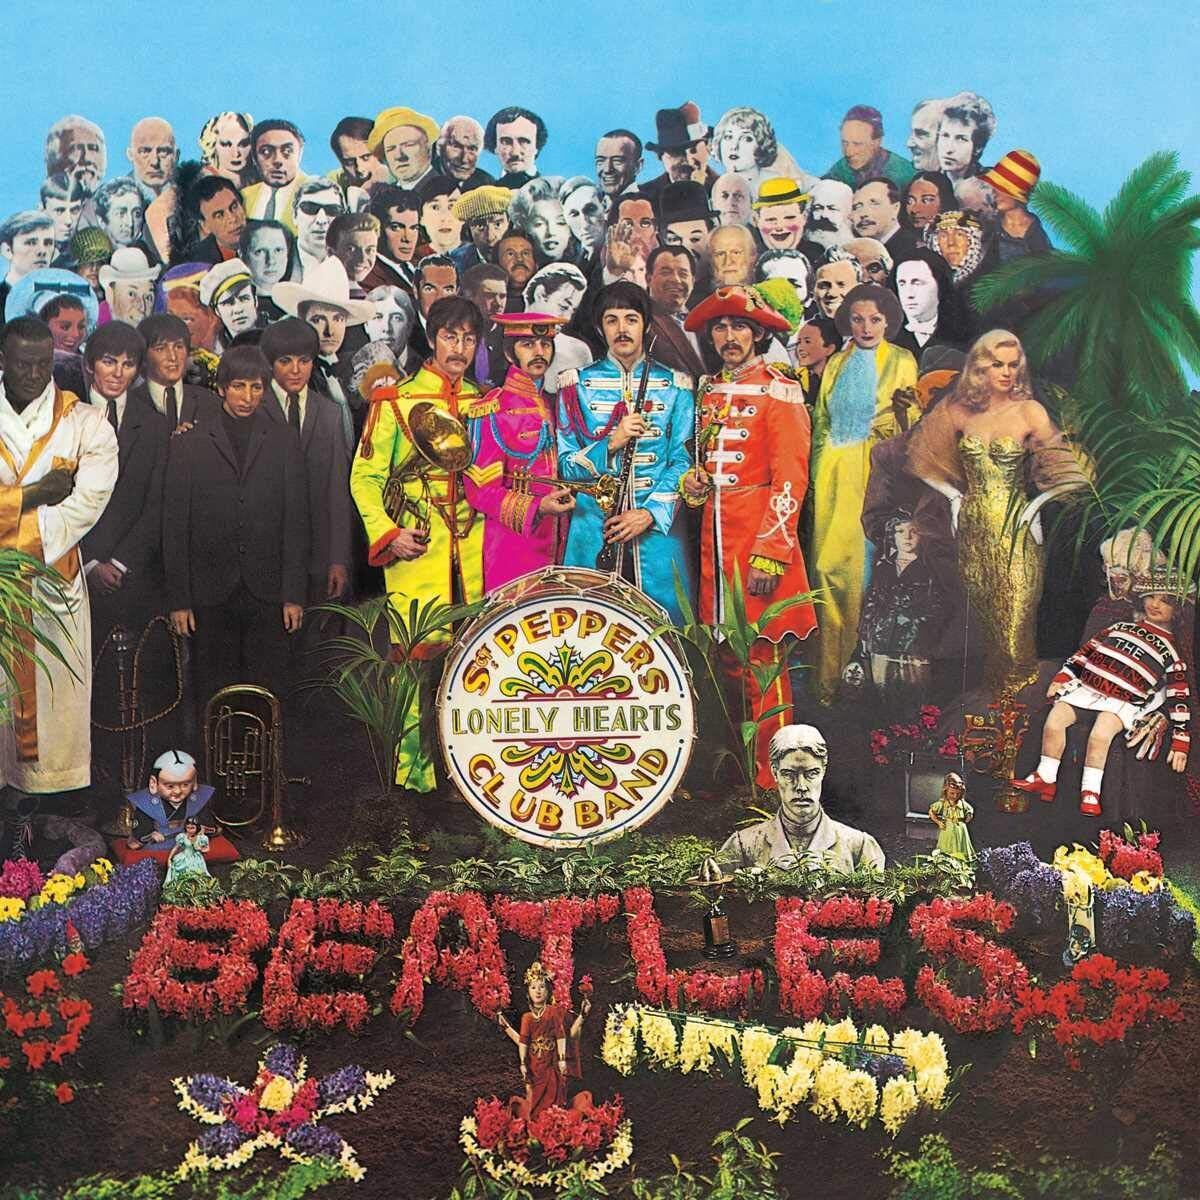 Capa de 'Sgt. Peppers Lonely Hearts Club Band'.